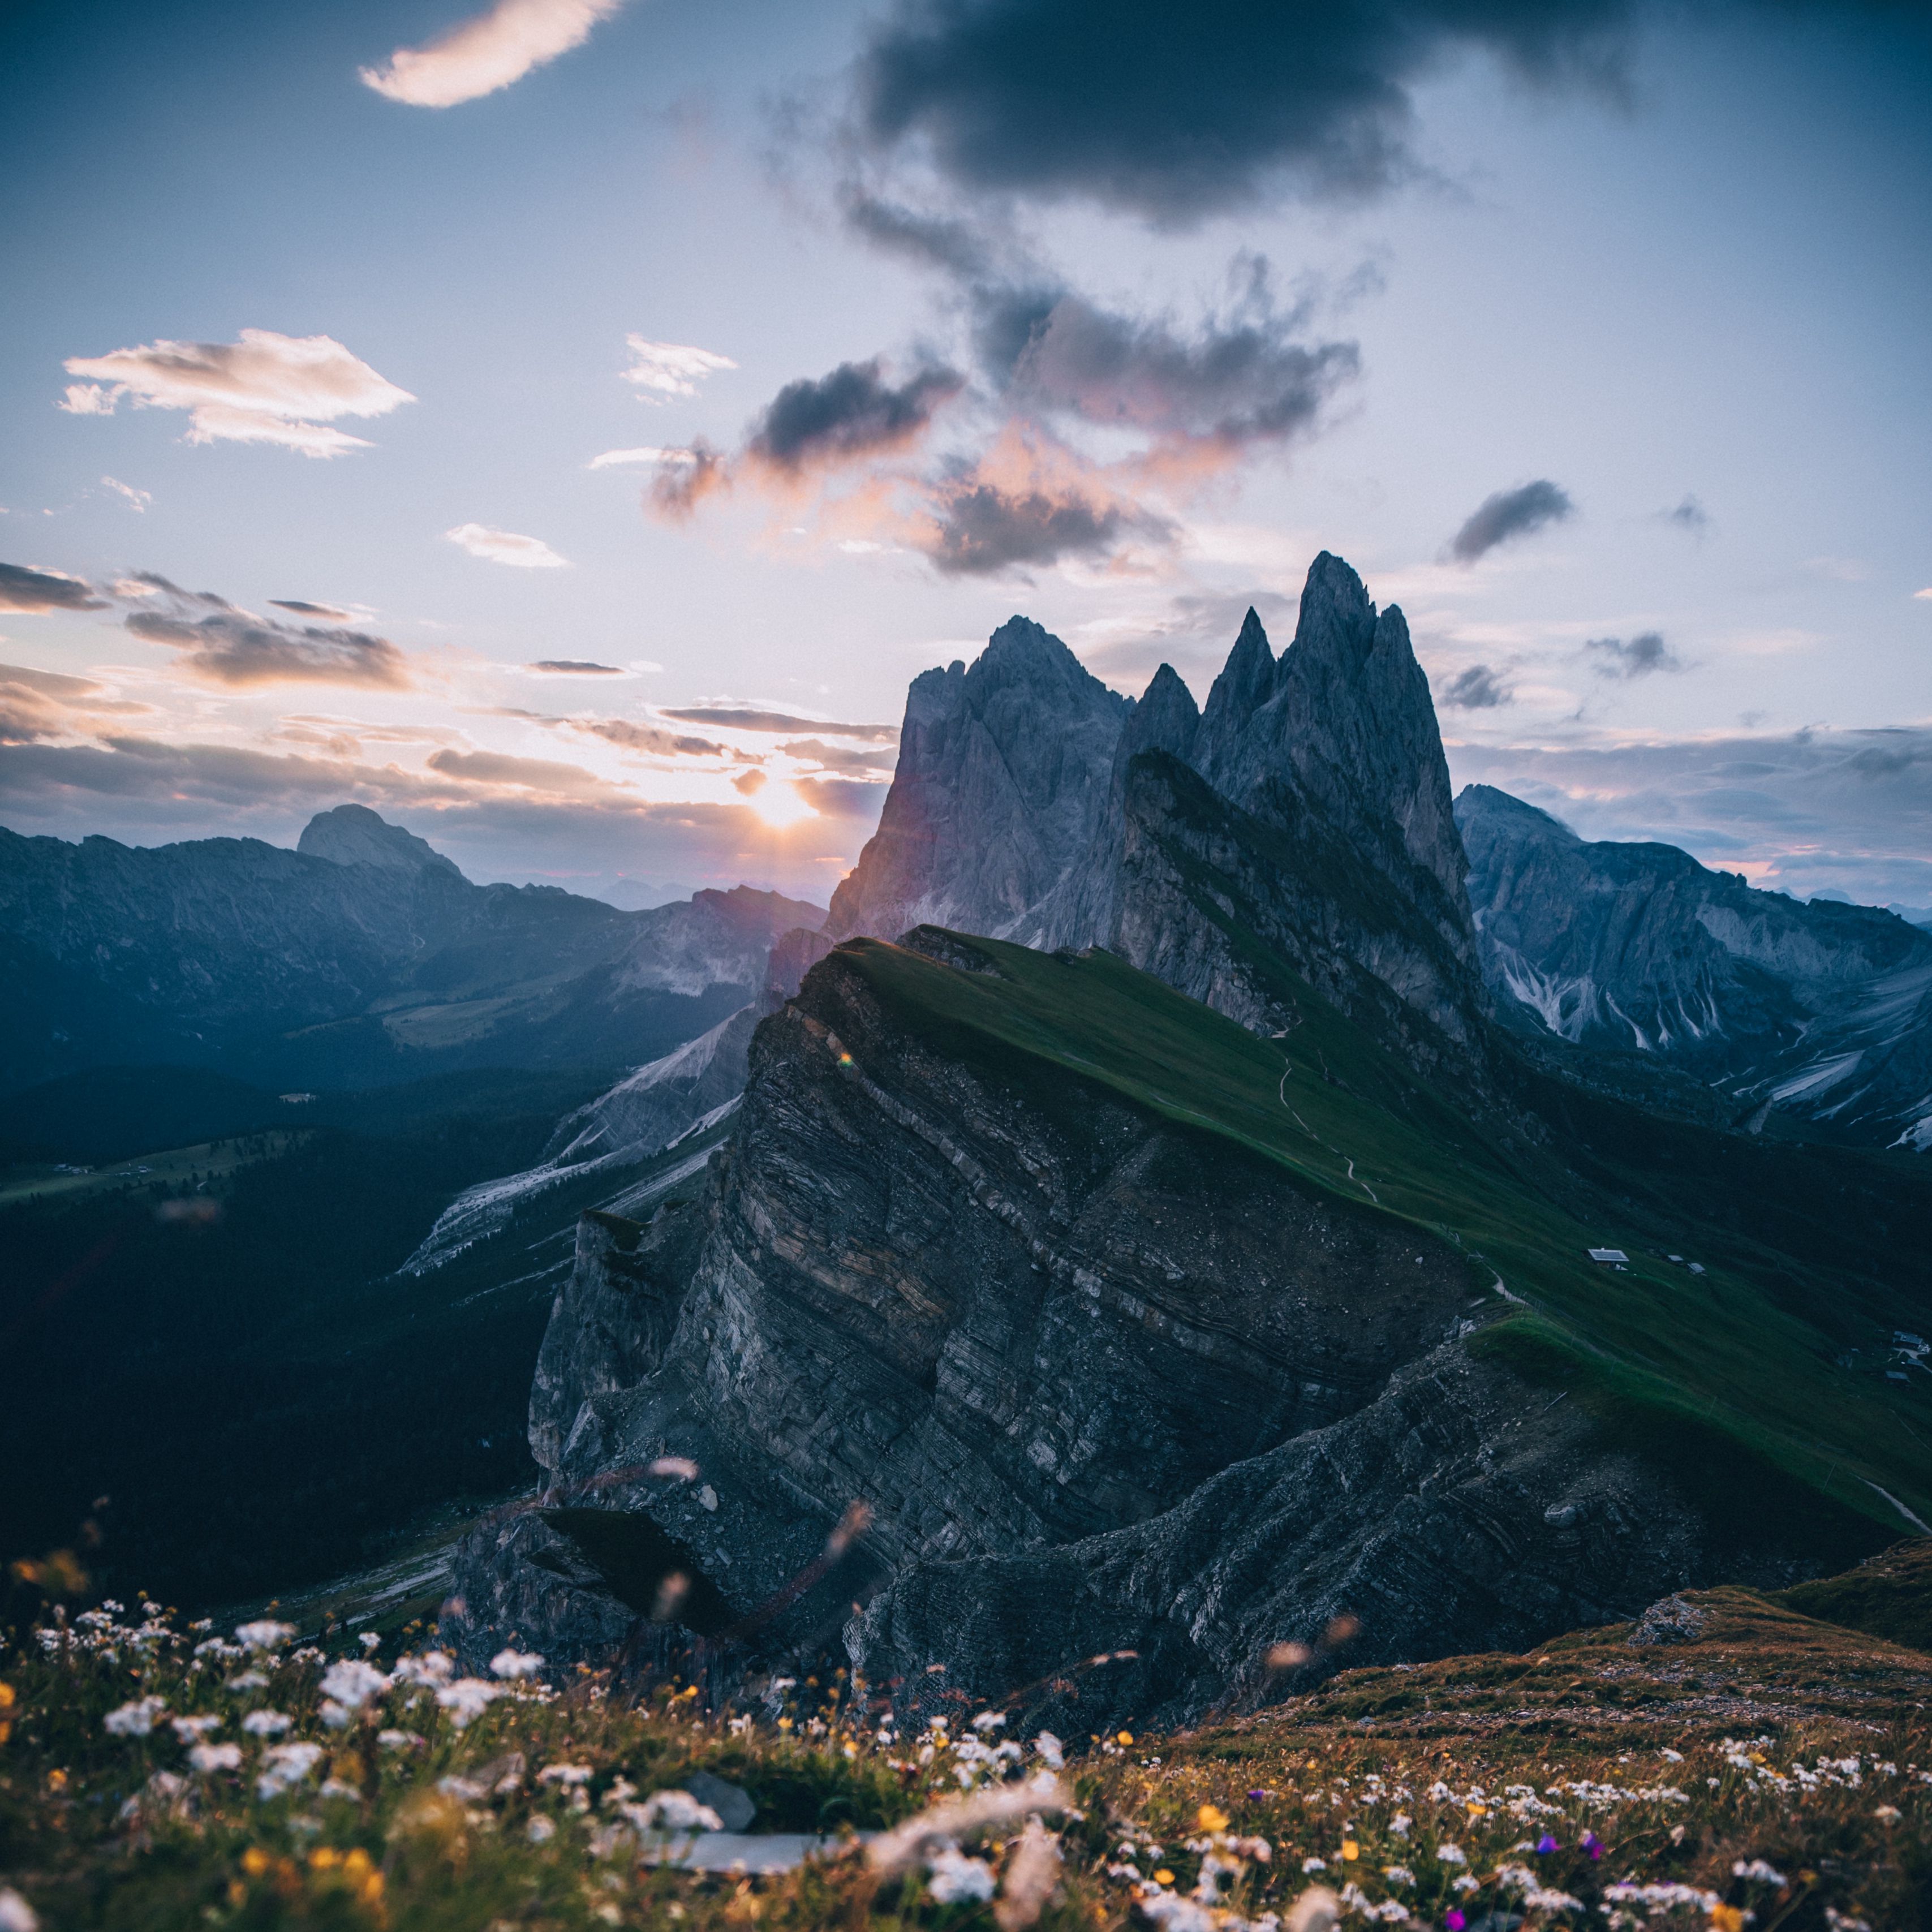 Download wallpaper 3415x3415 mountains, alps, peaks, lawn, sky, landscape ipad pro 12.9 retina for parallax HD background